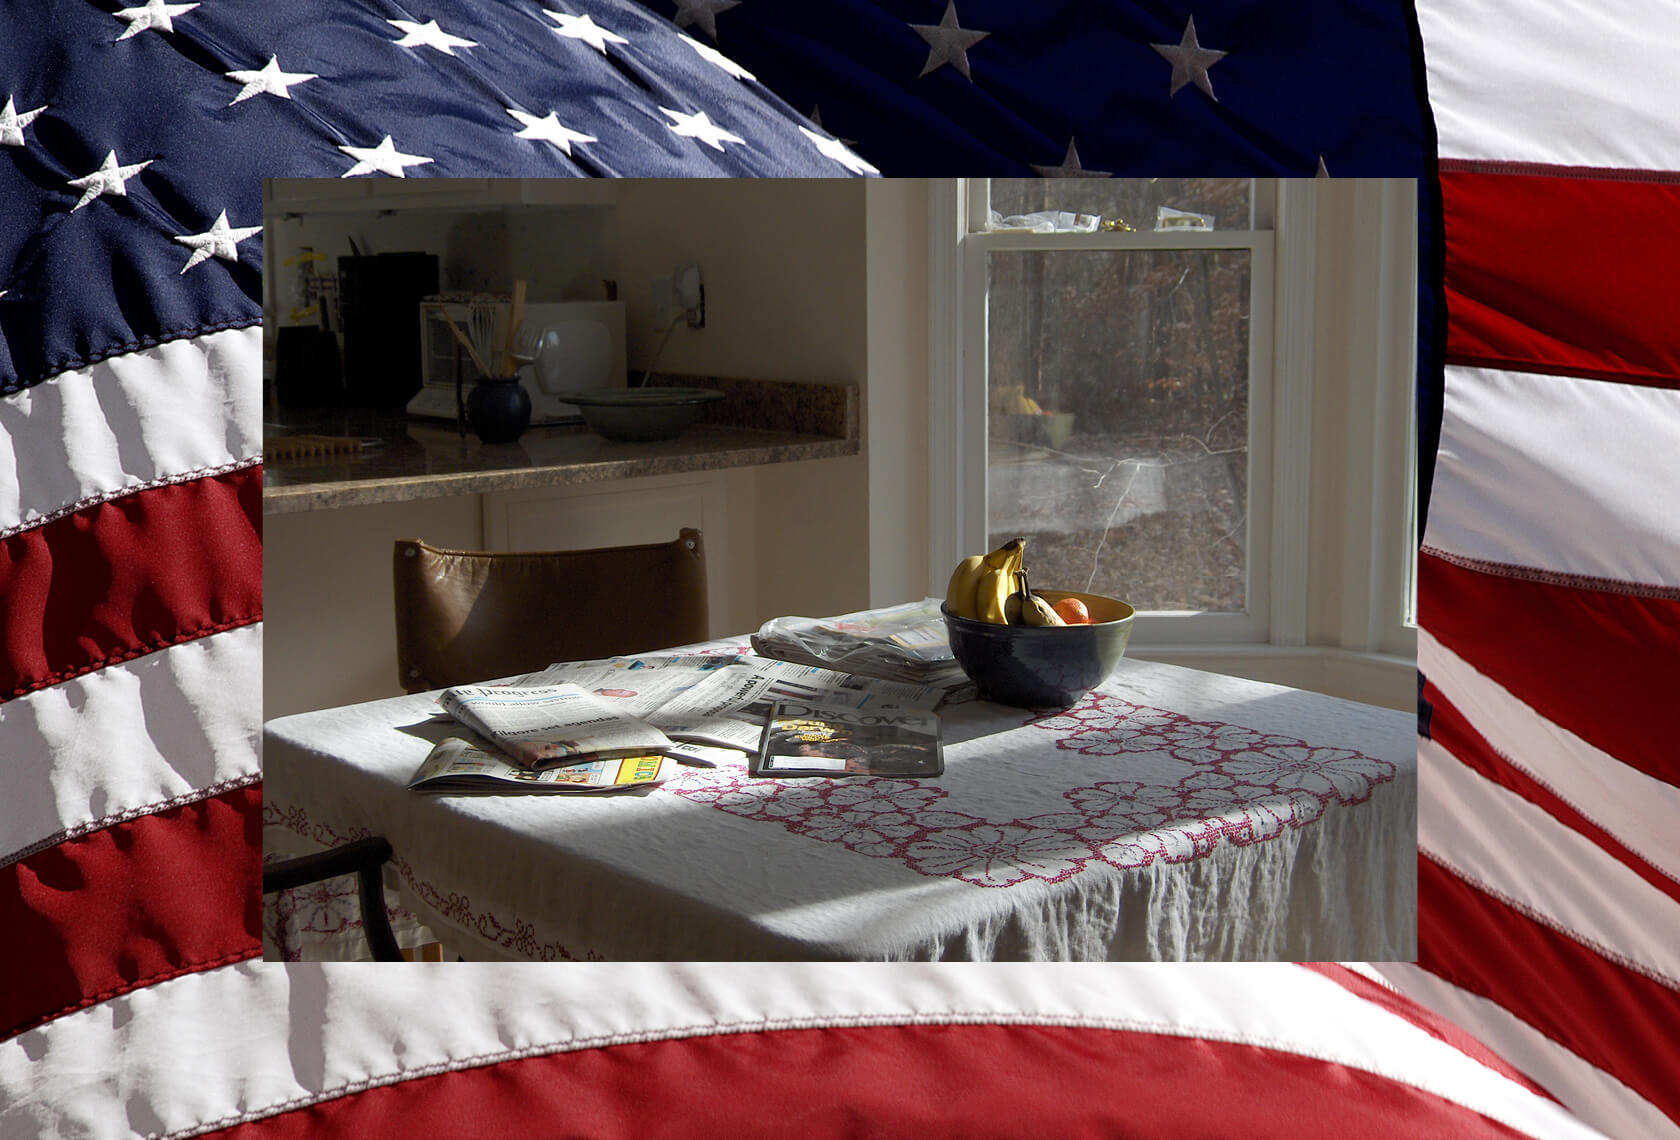 A kitchen table with newspapers and fruit bowl layers over the American flag. November 2020